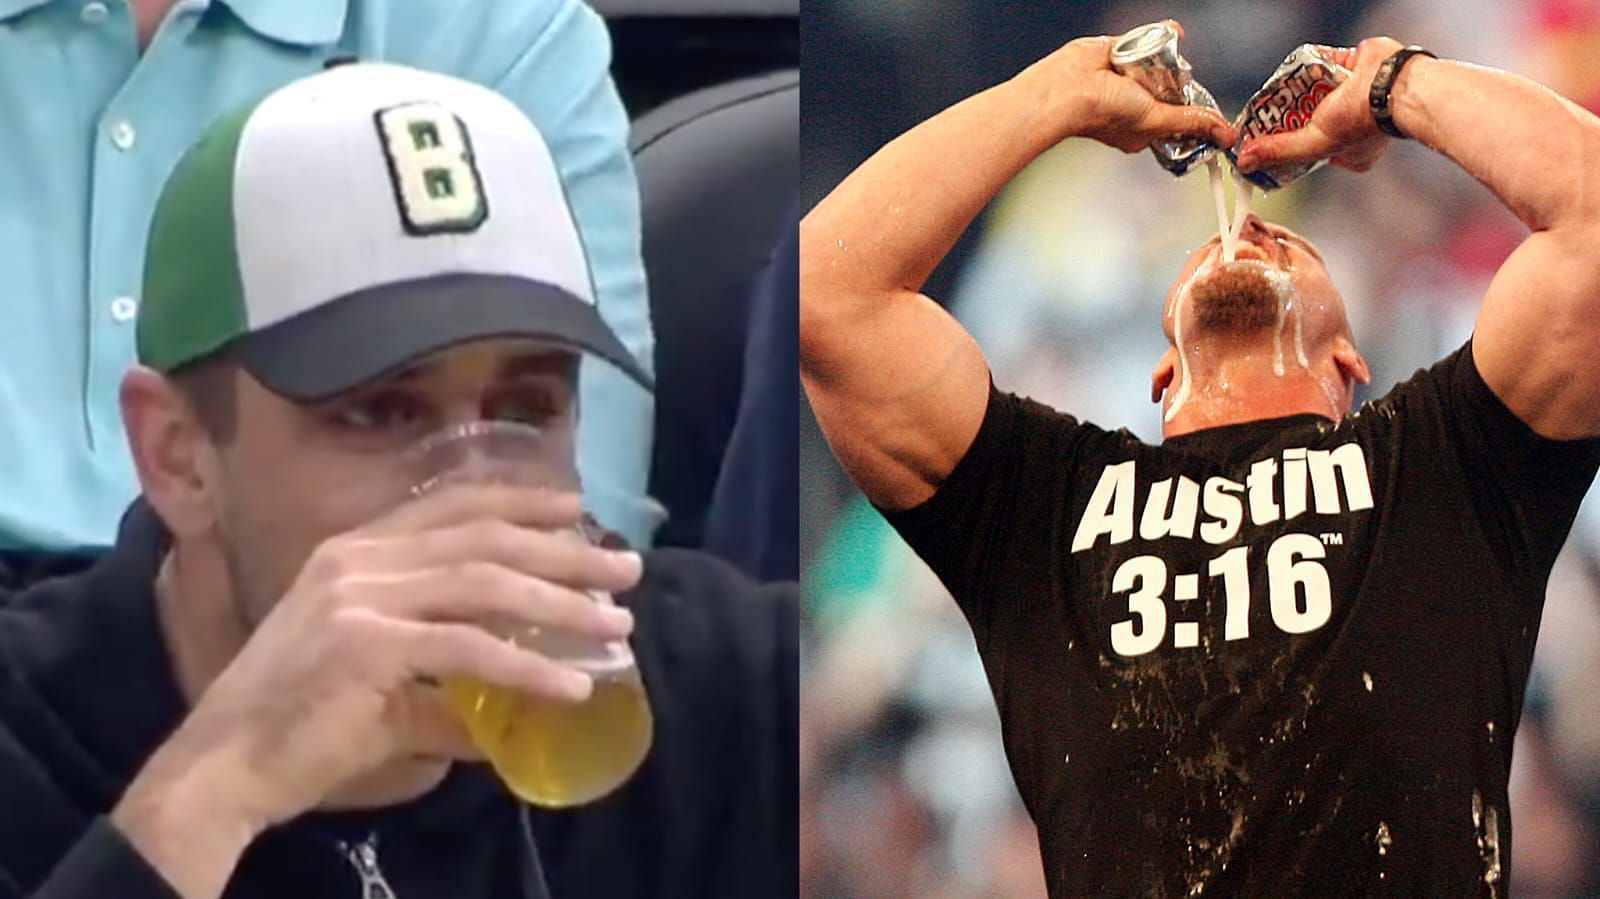 Stone Cold' Steve Austin Drinks Beers W/ Fans on 'Austin 3:16' Day